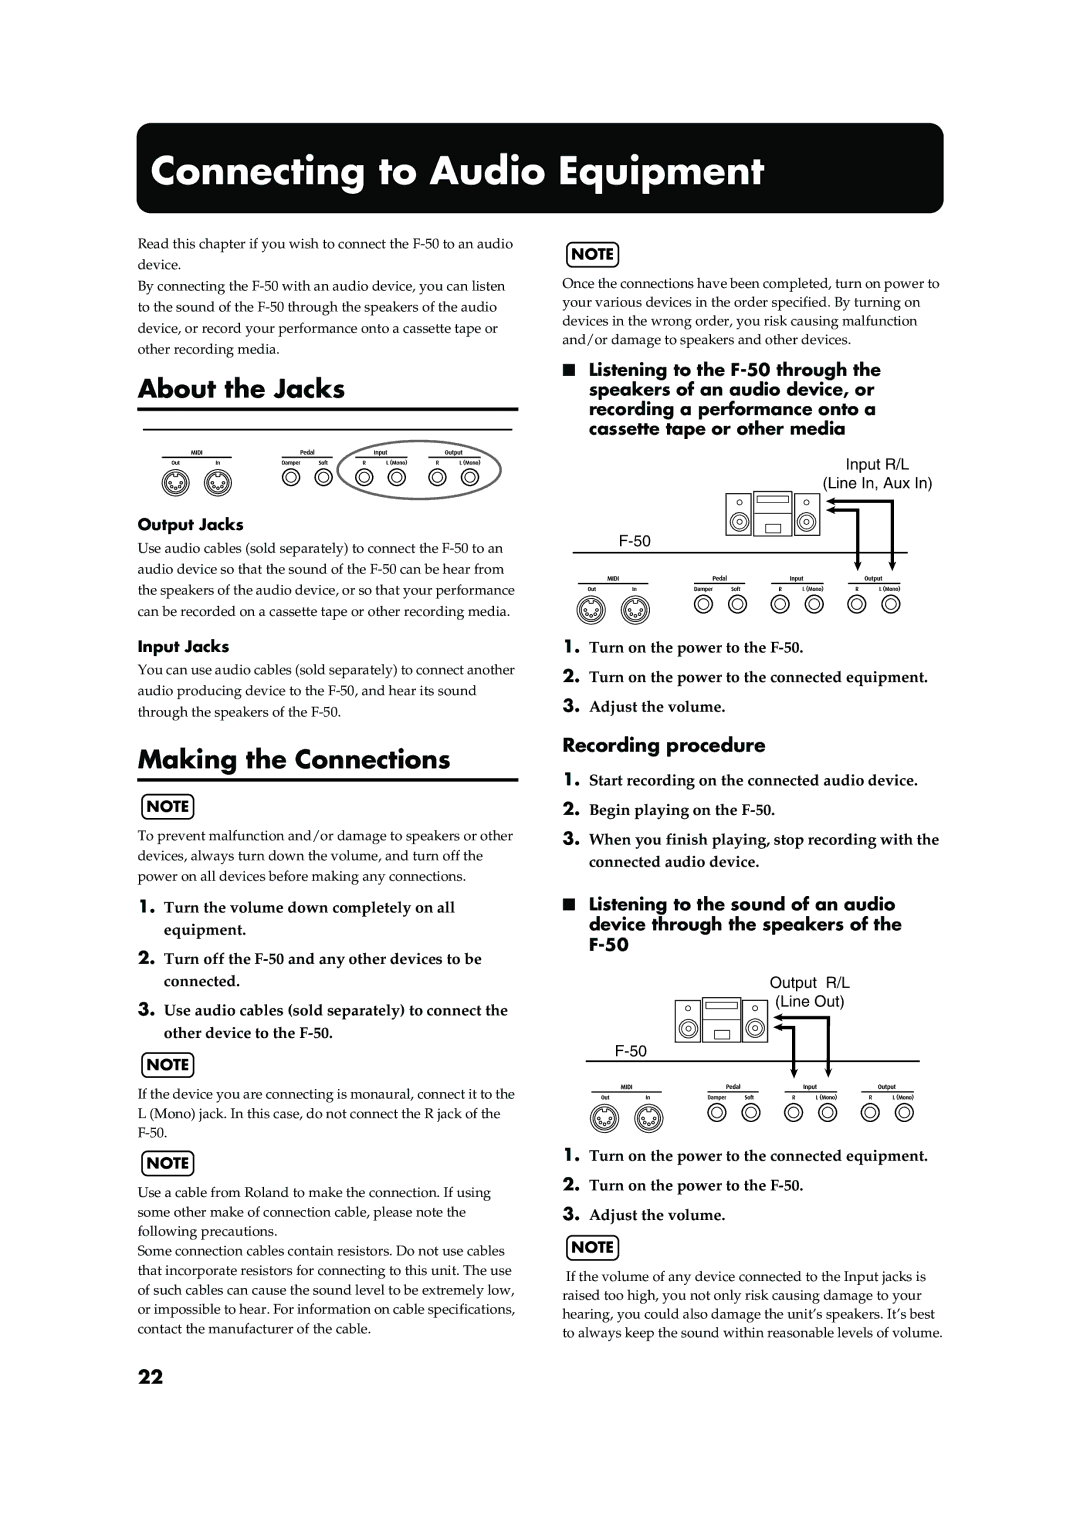 Roland F-50 owner manual Connecting to Audio Equipment, About the Jacks, Making the Connections, Recording procedure 